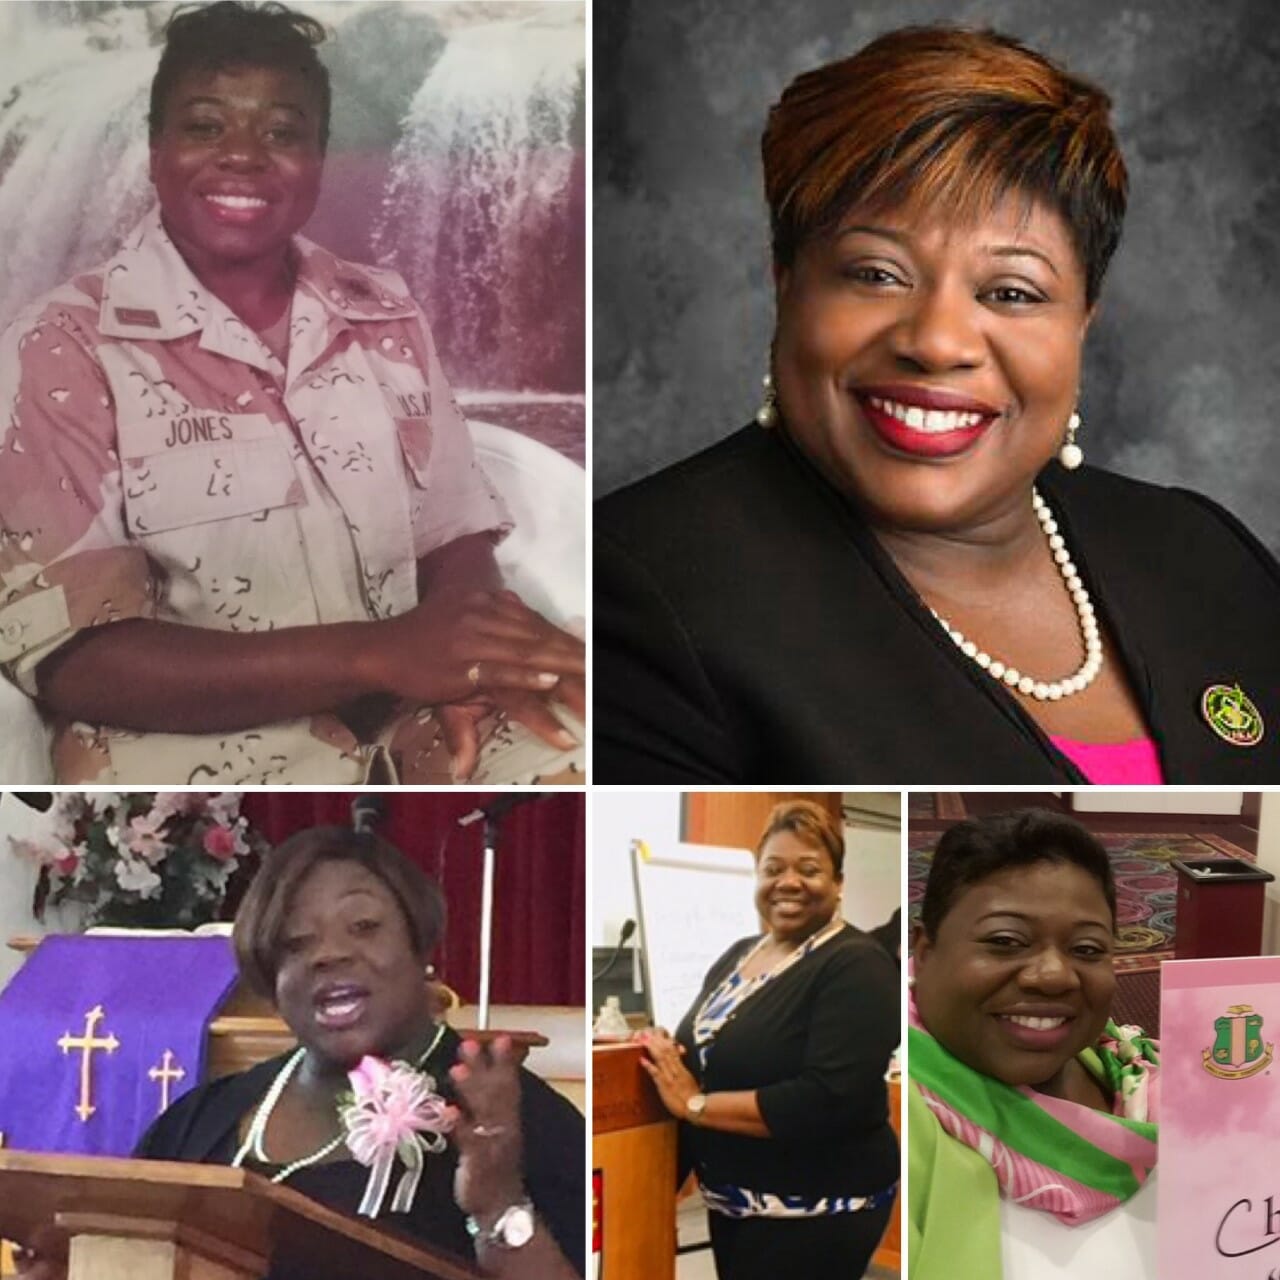 A black woman in military attire, in a black jacket with pearls, in a white and pink shirt, and at a church.